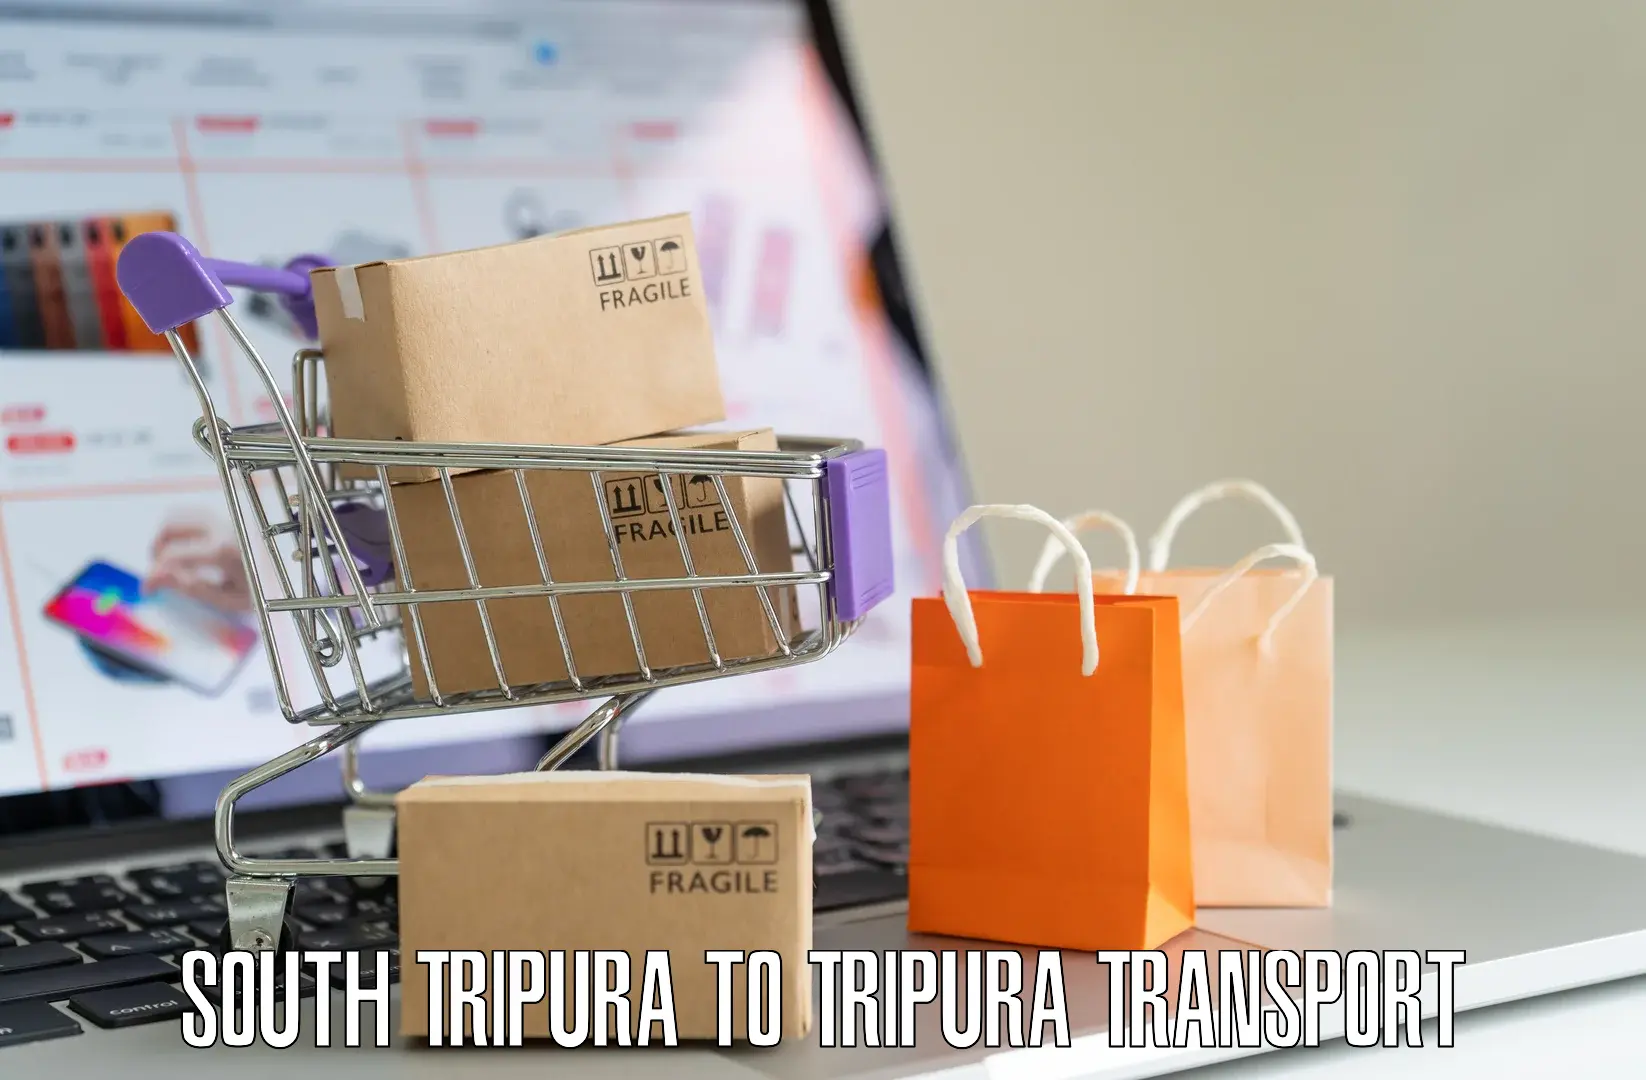 Pick up transport service in South Tripura to North Tripura